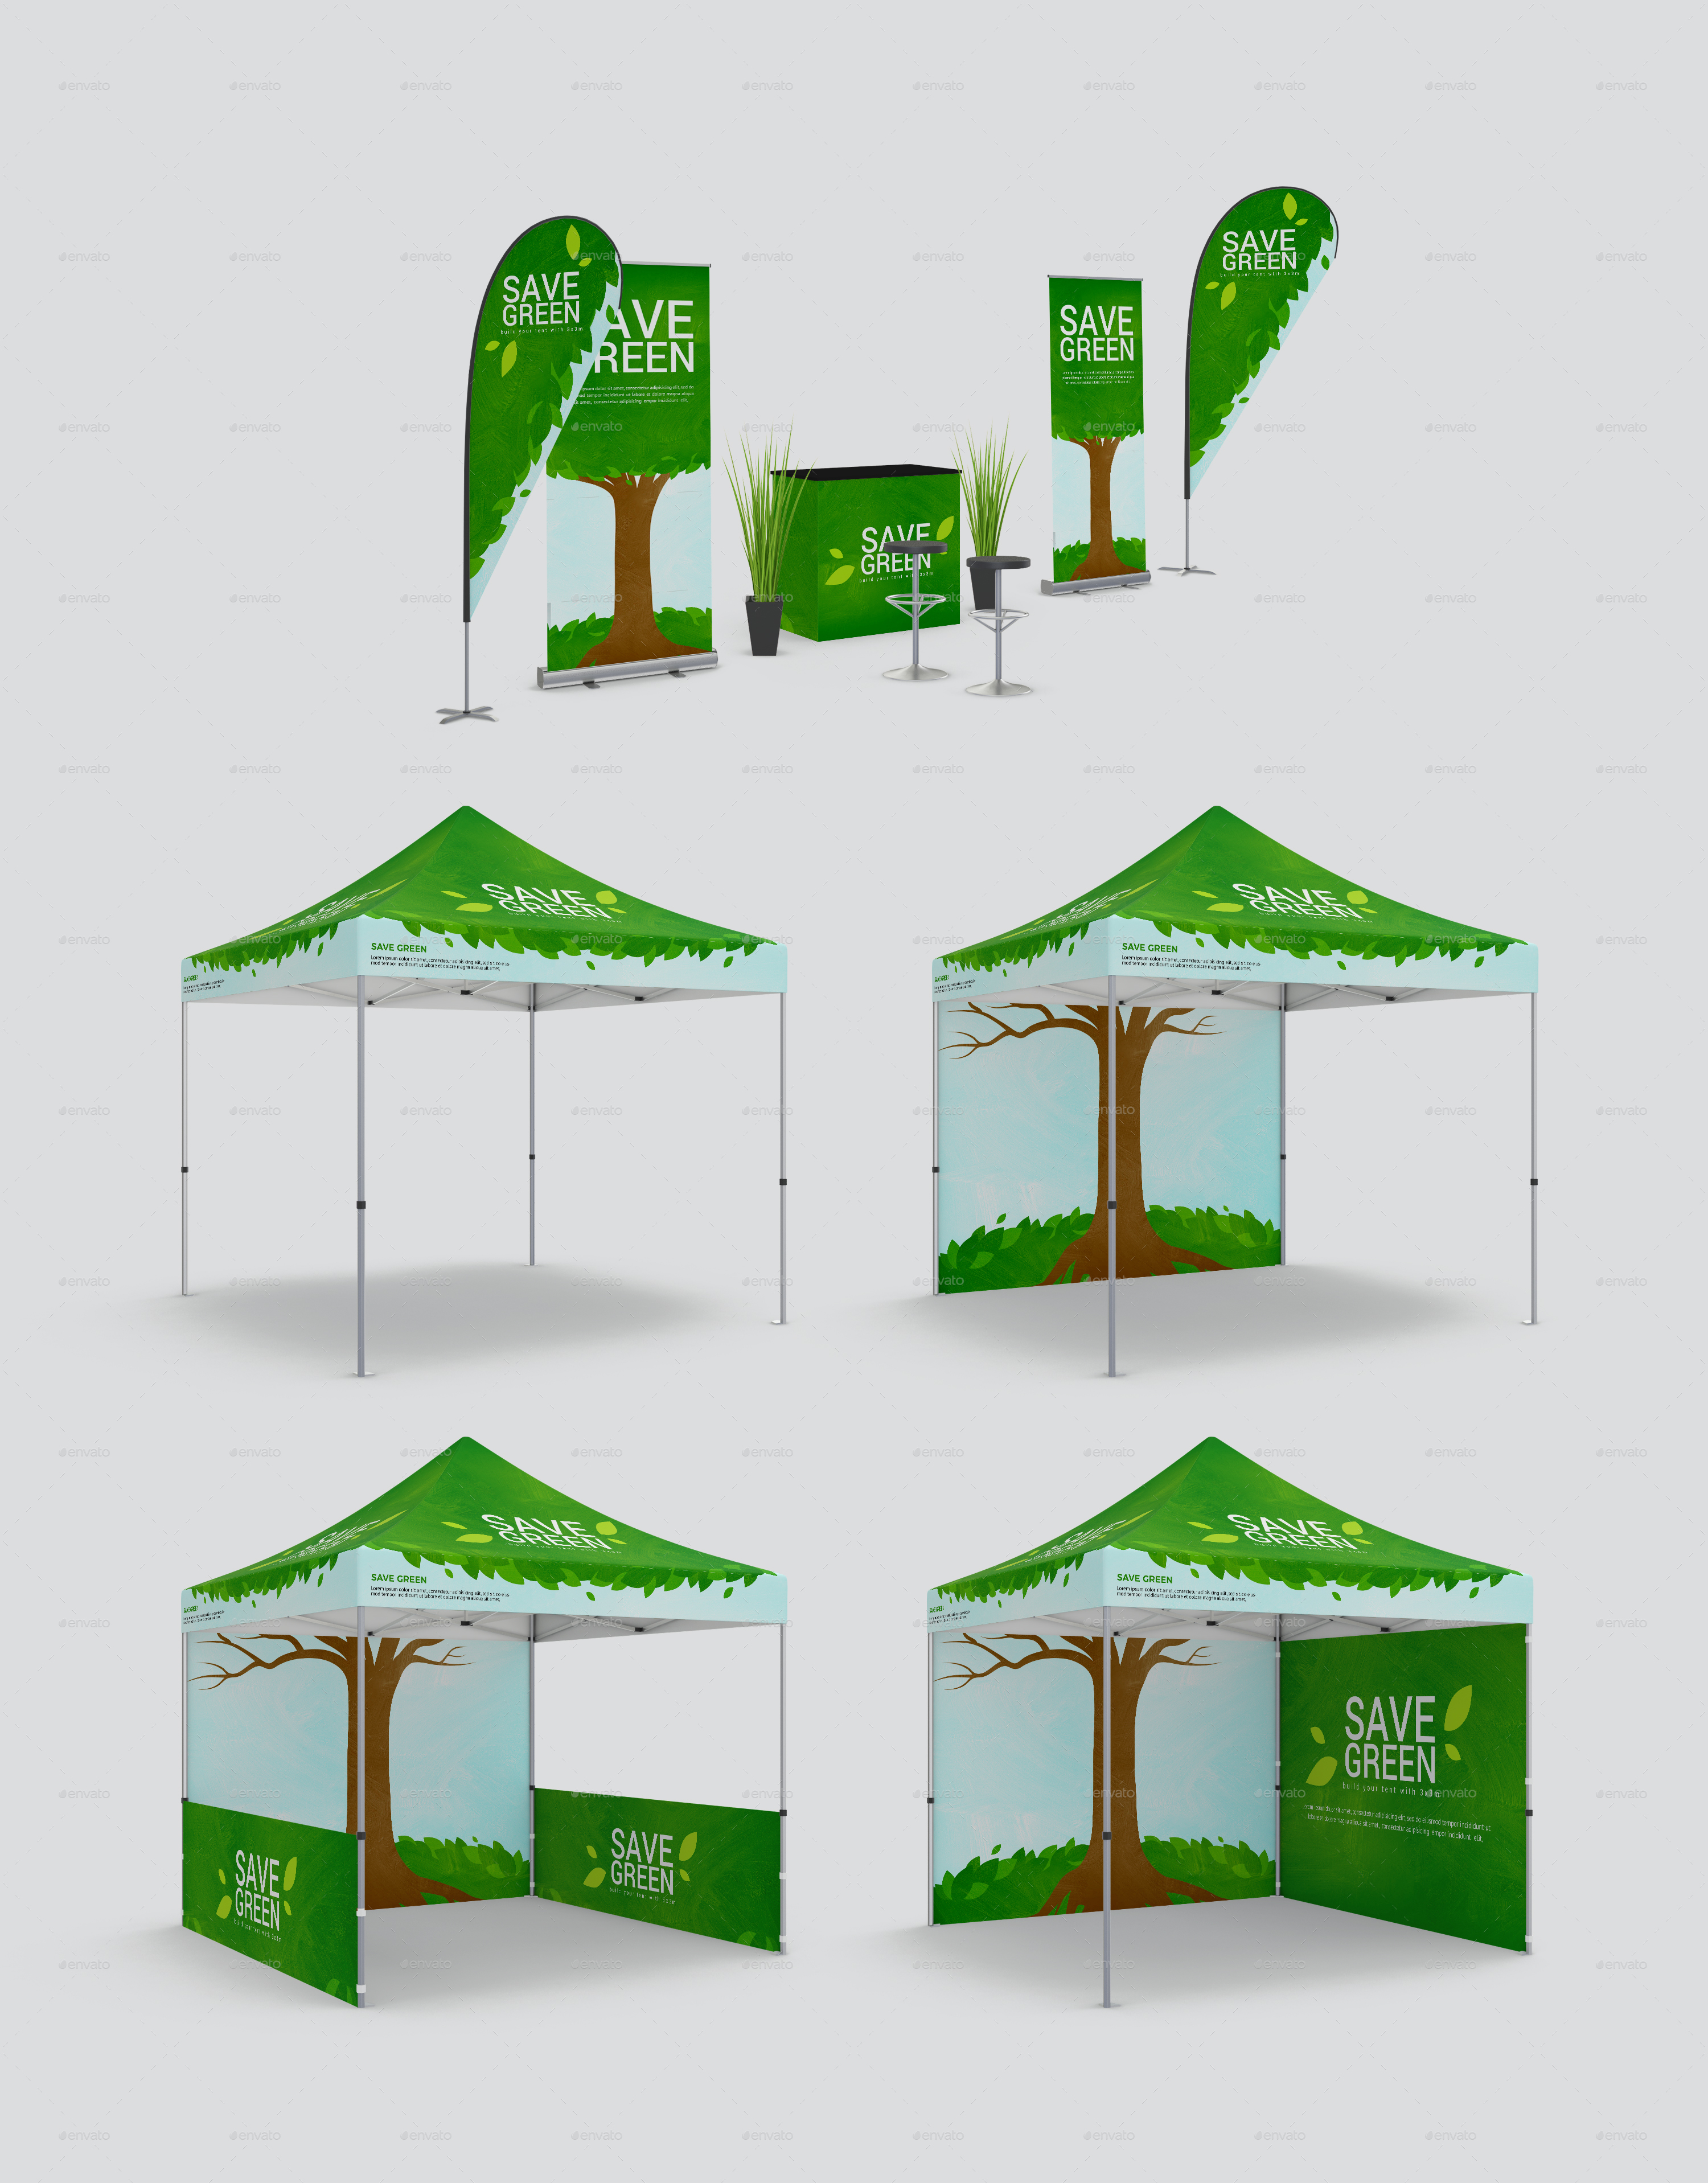 Tent Gazebo / Event Stand Canopy Mockup / Trade Show ...